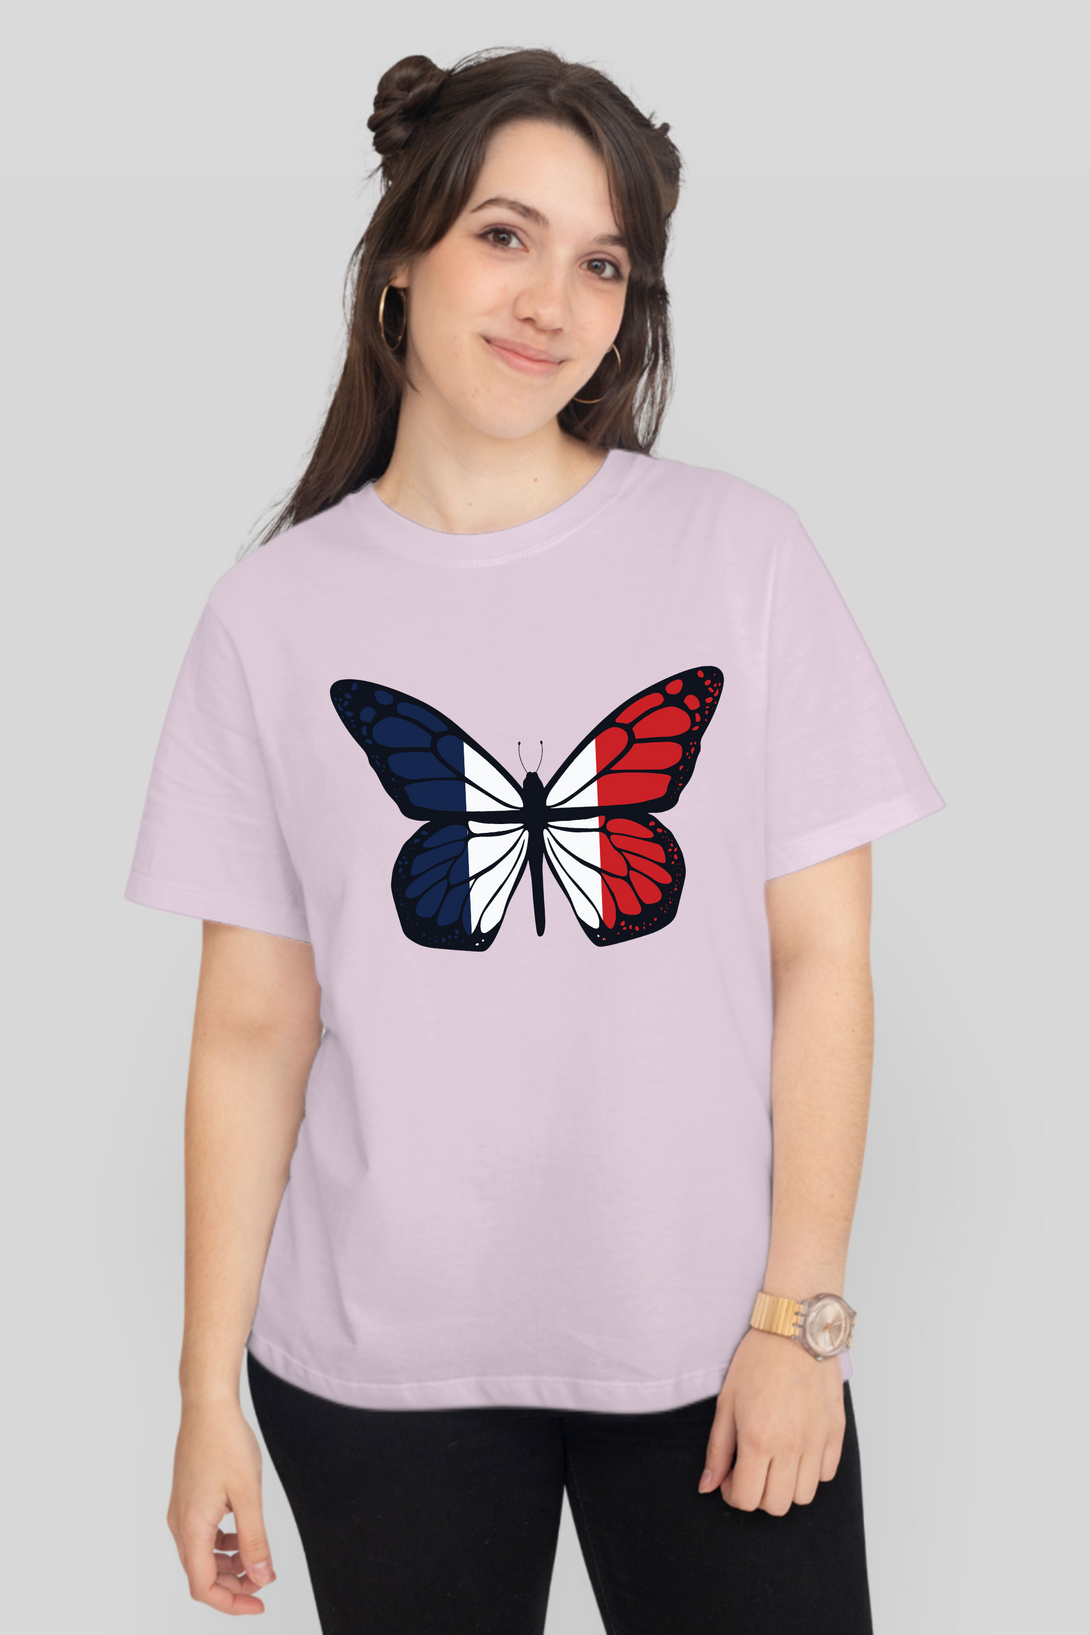 French Butterfly Printed T-Shirt For Women - WowWaves - 10